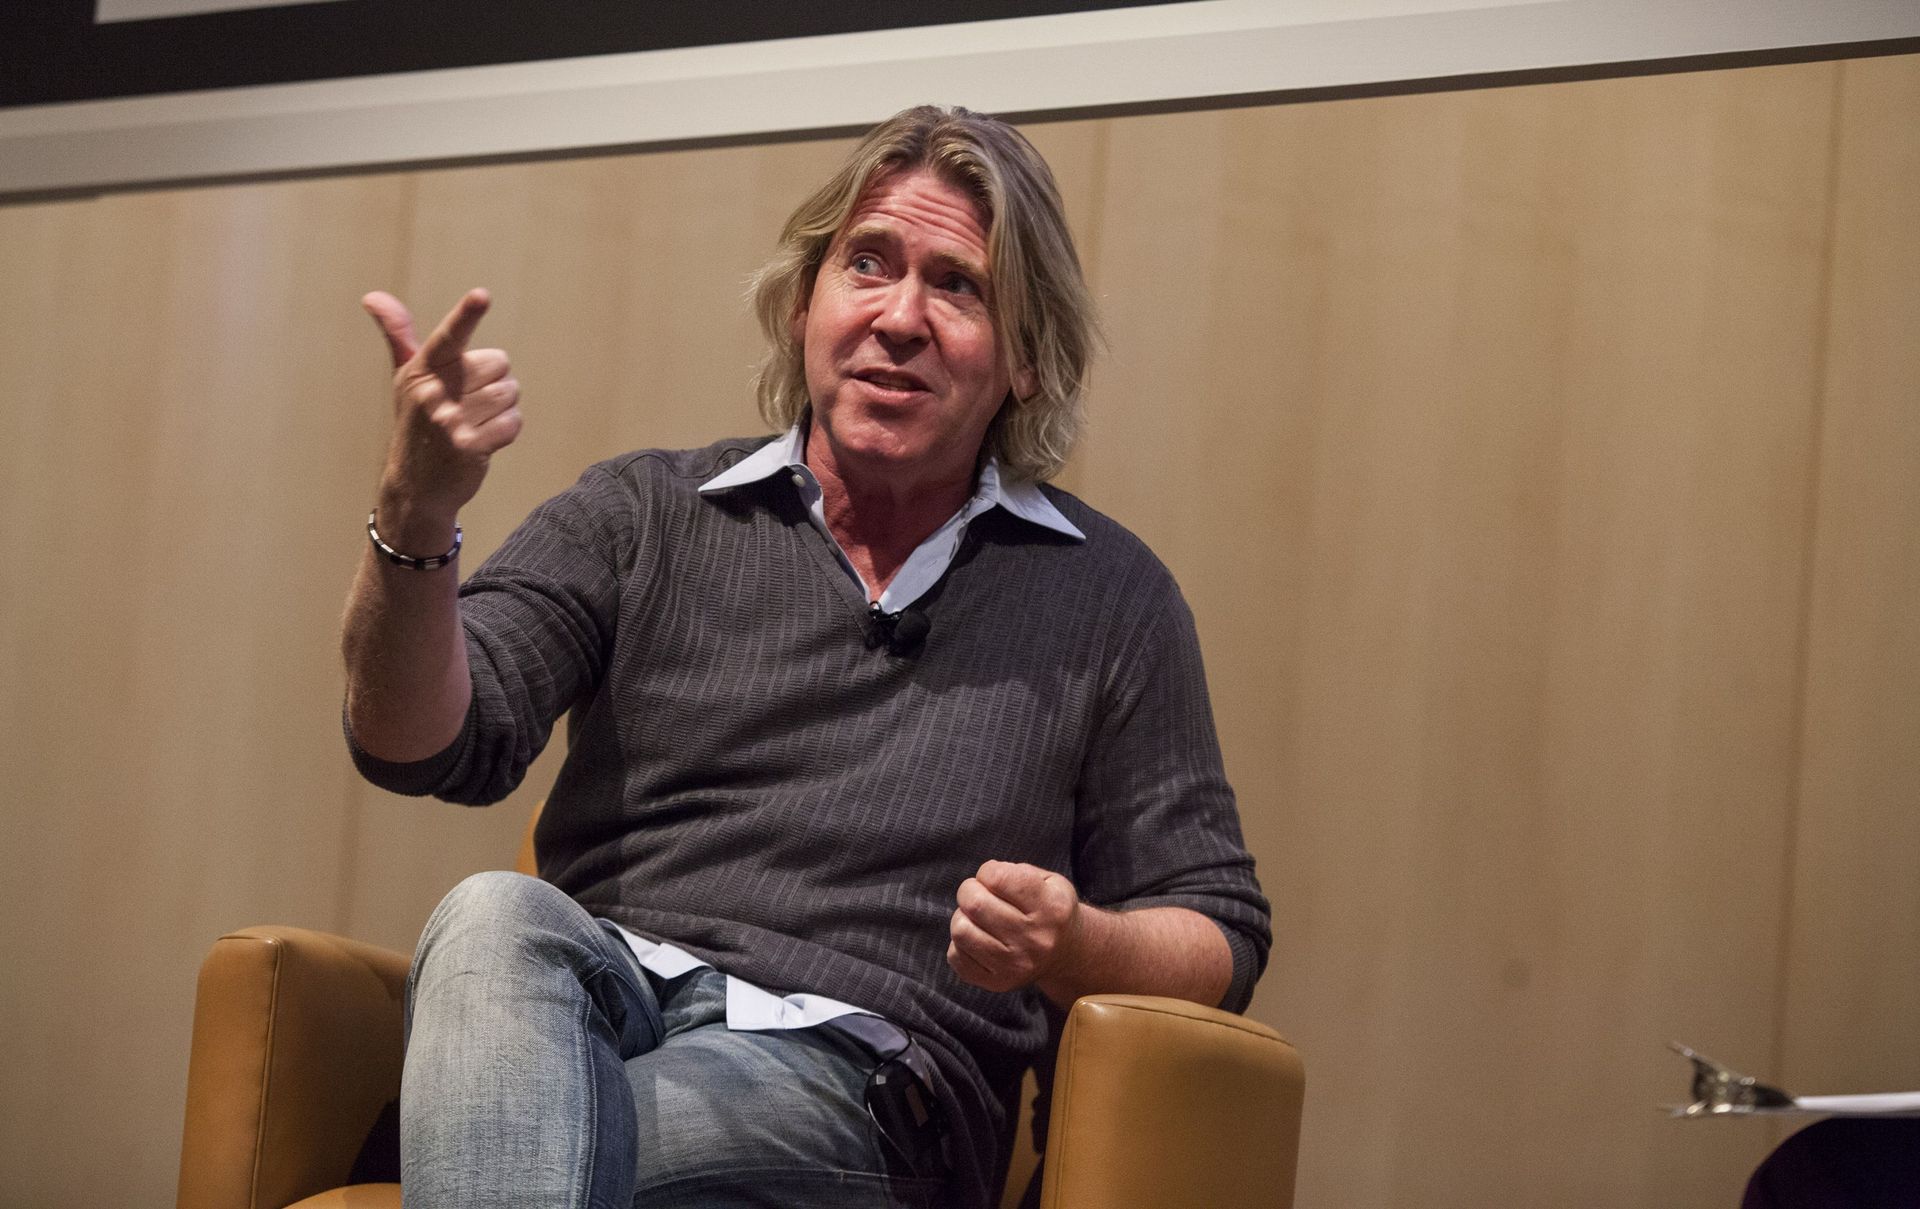 GRAMMY SoundTables: Behind The Glass With Steve Lillywhite